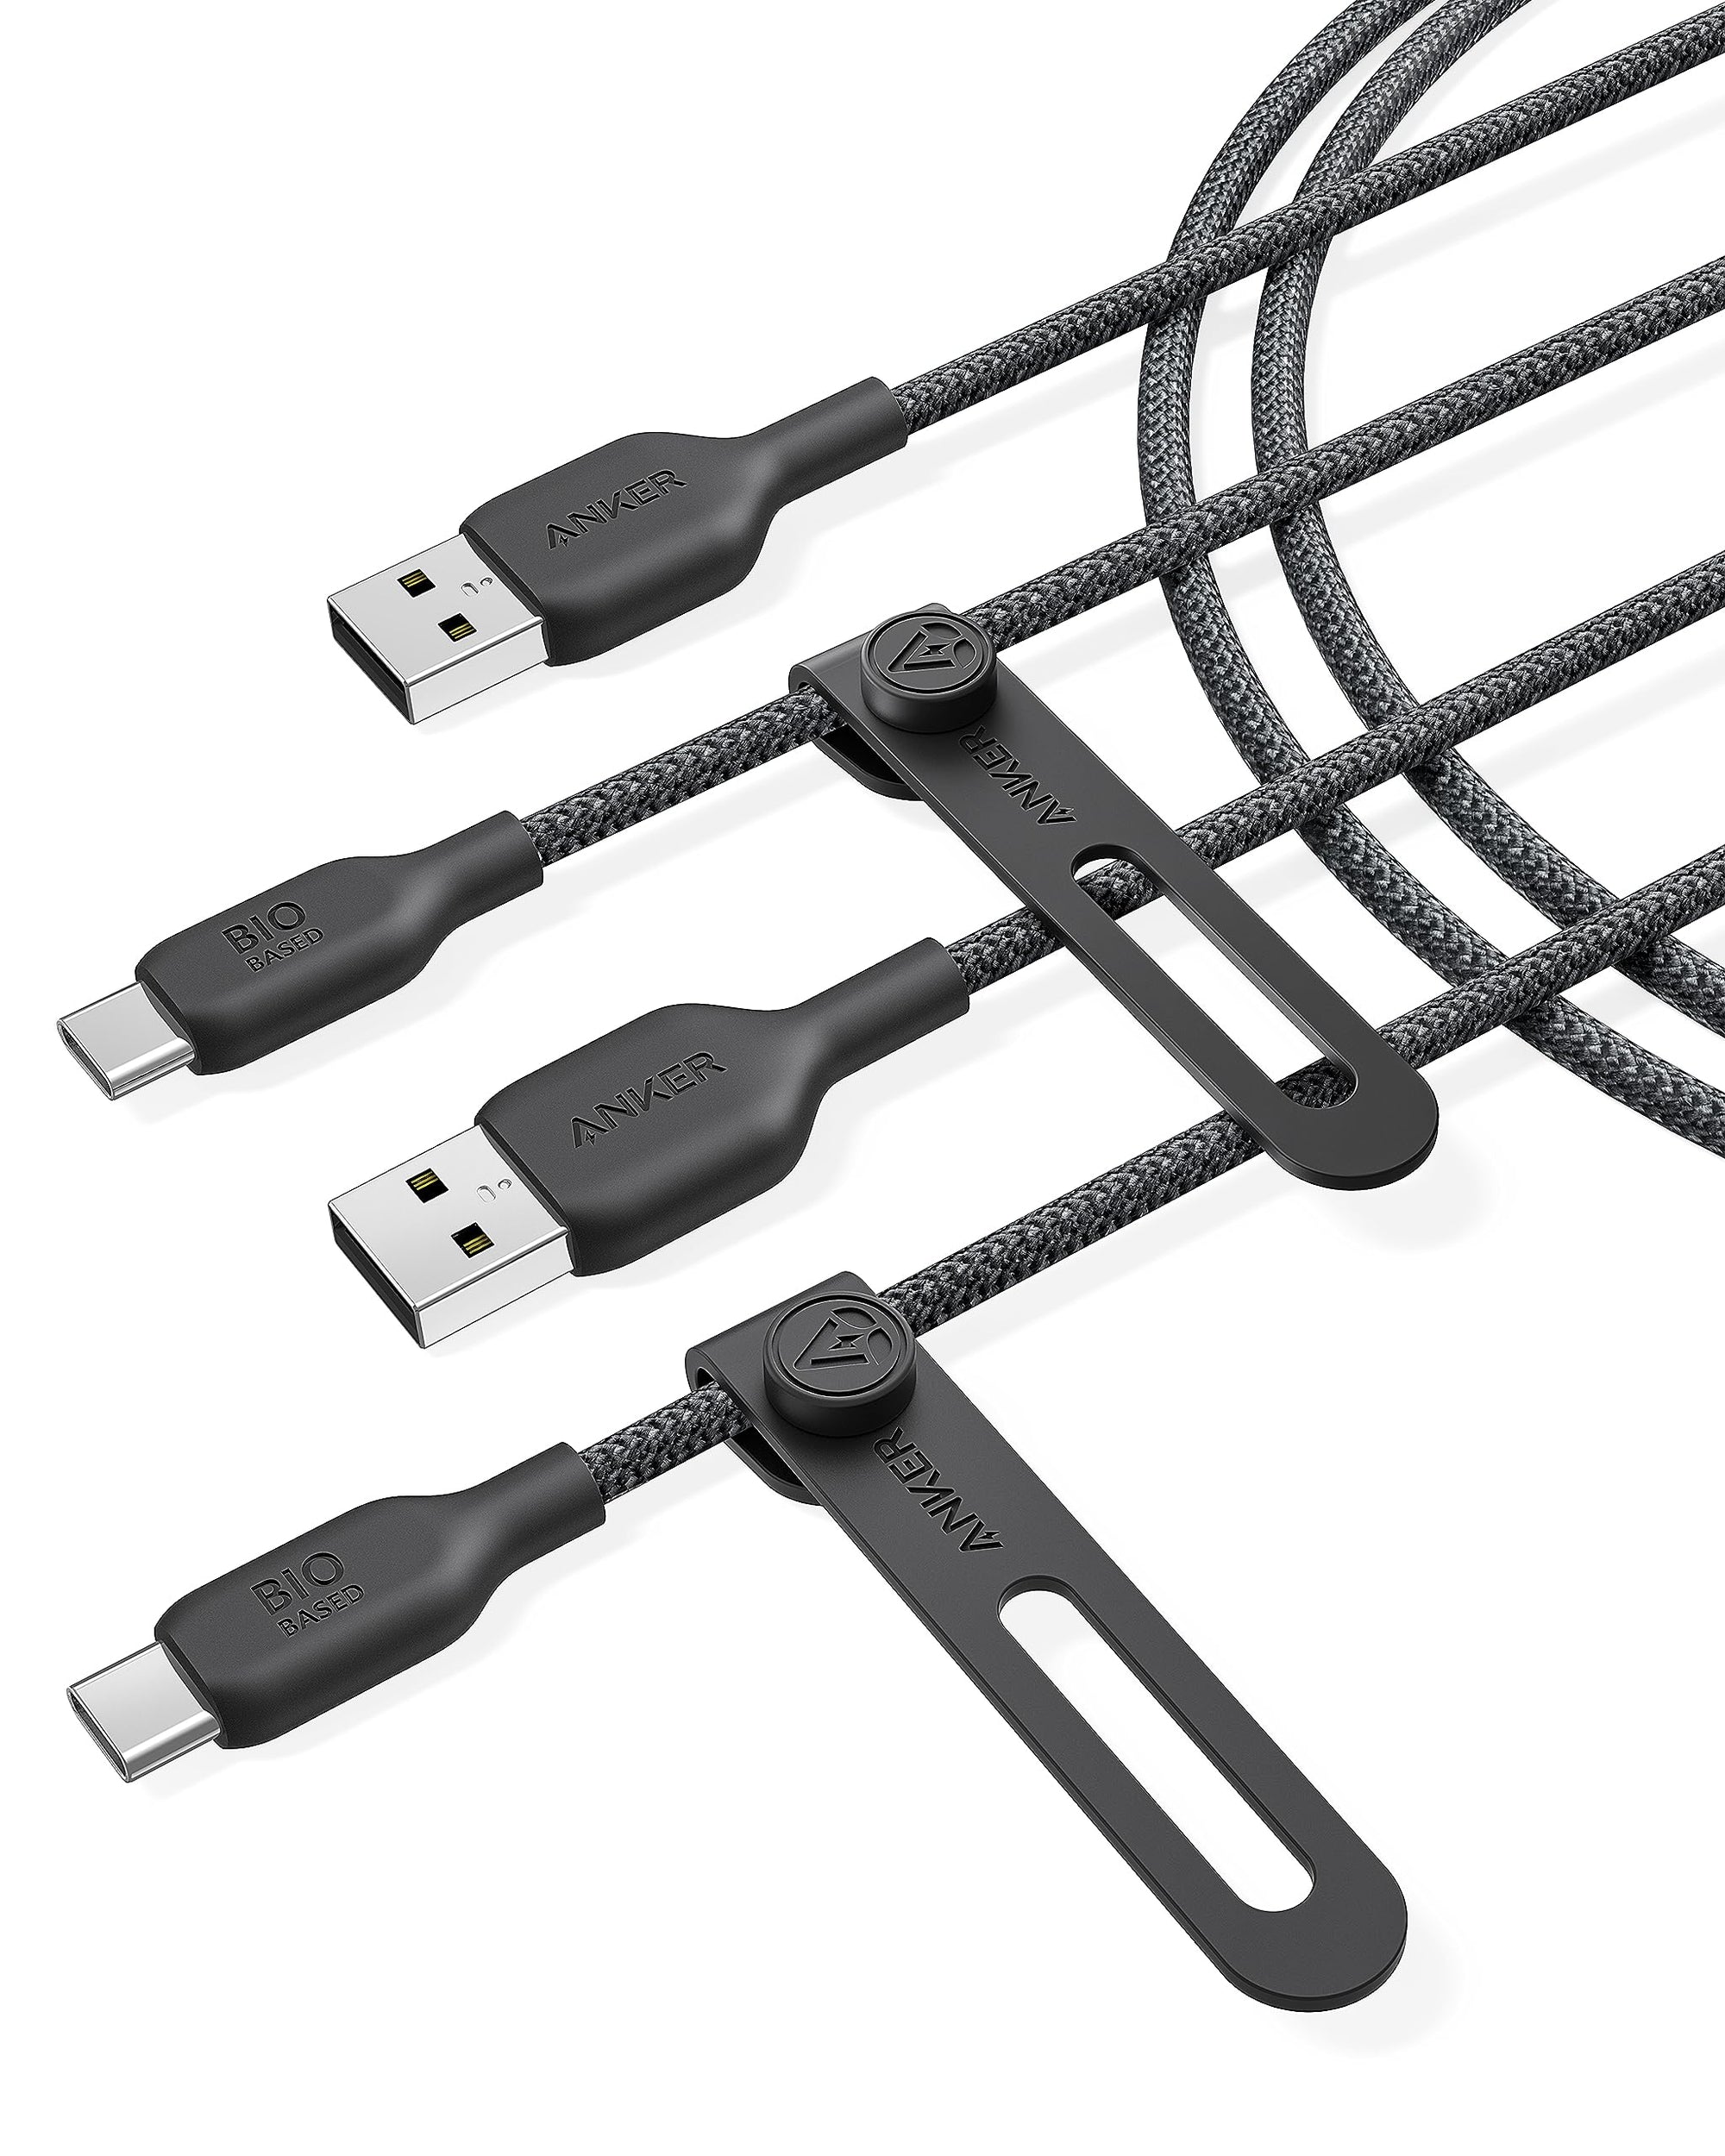 Anker USB-A to USB-C Cable (6 ft, Bio-Briaded, 2-Pack)